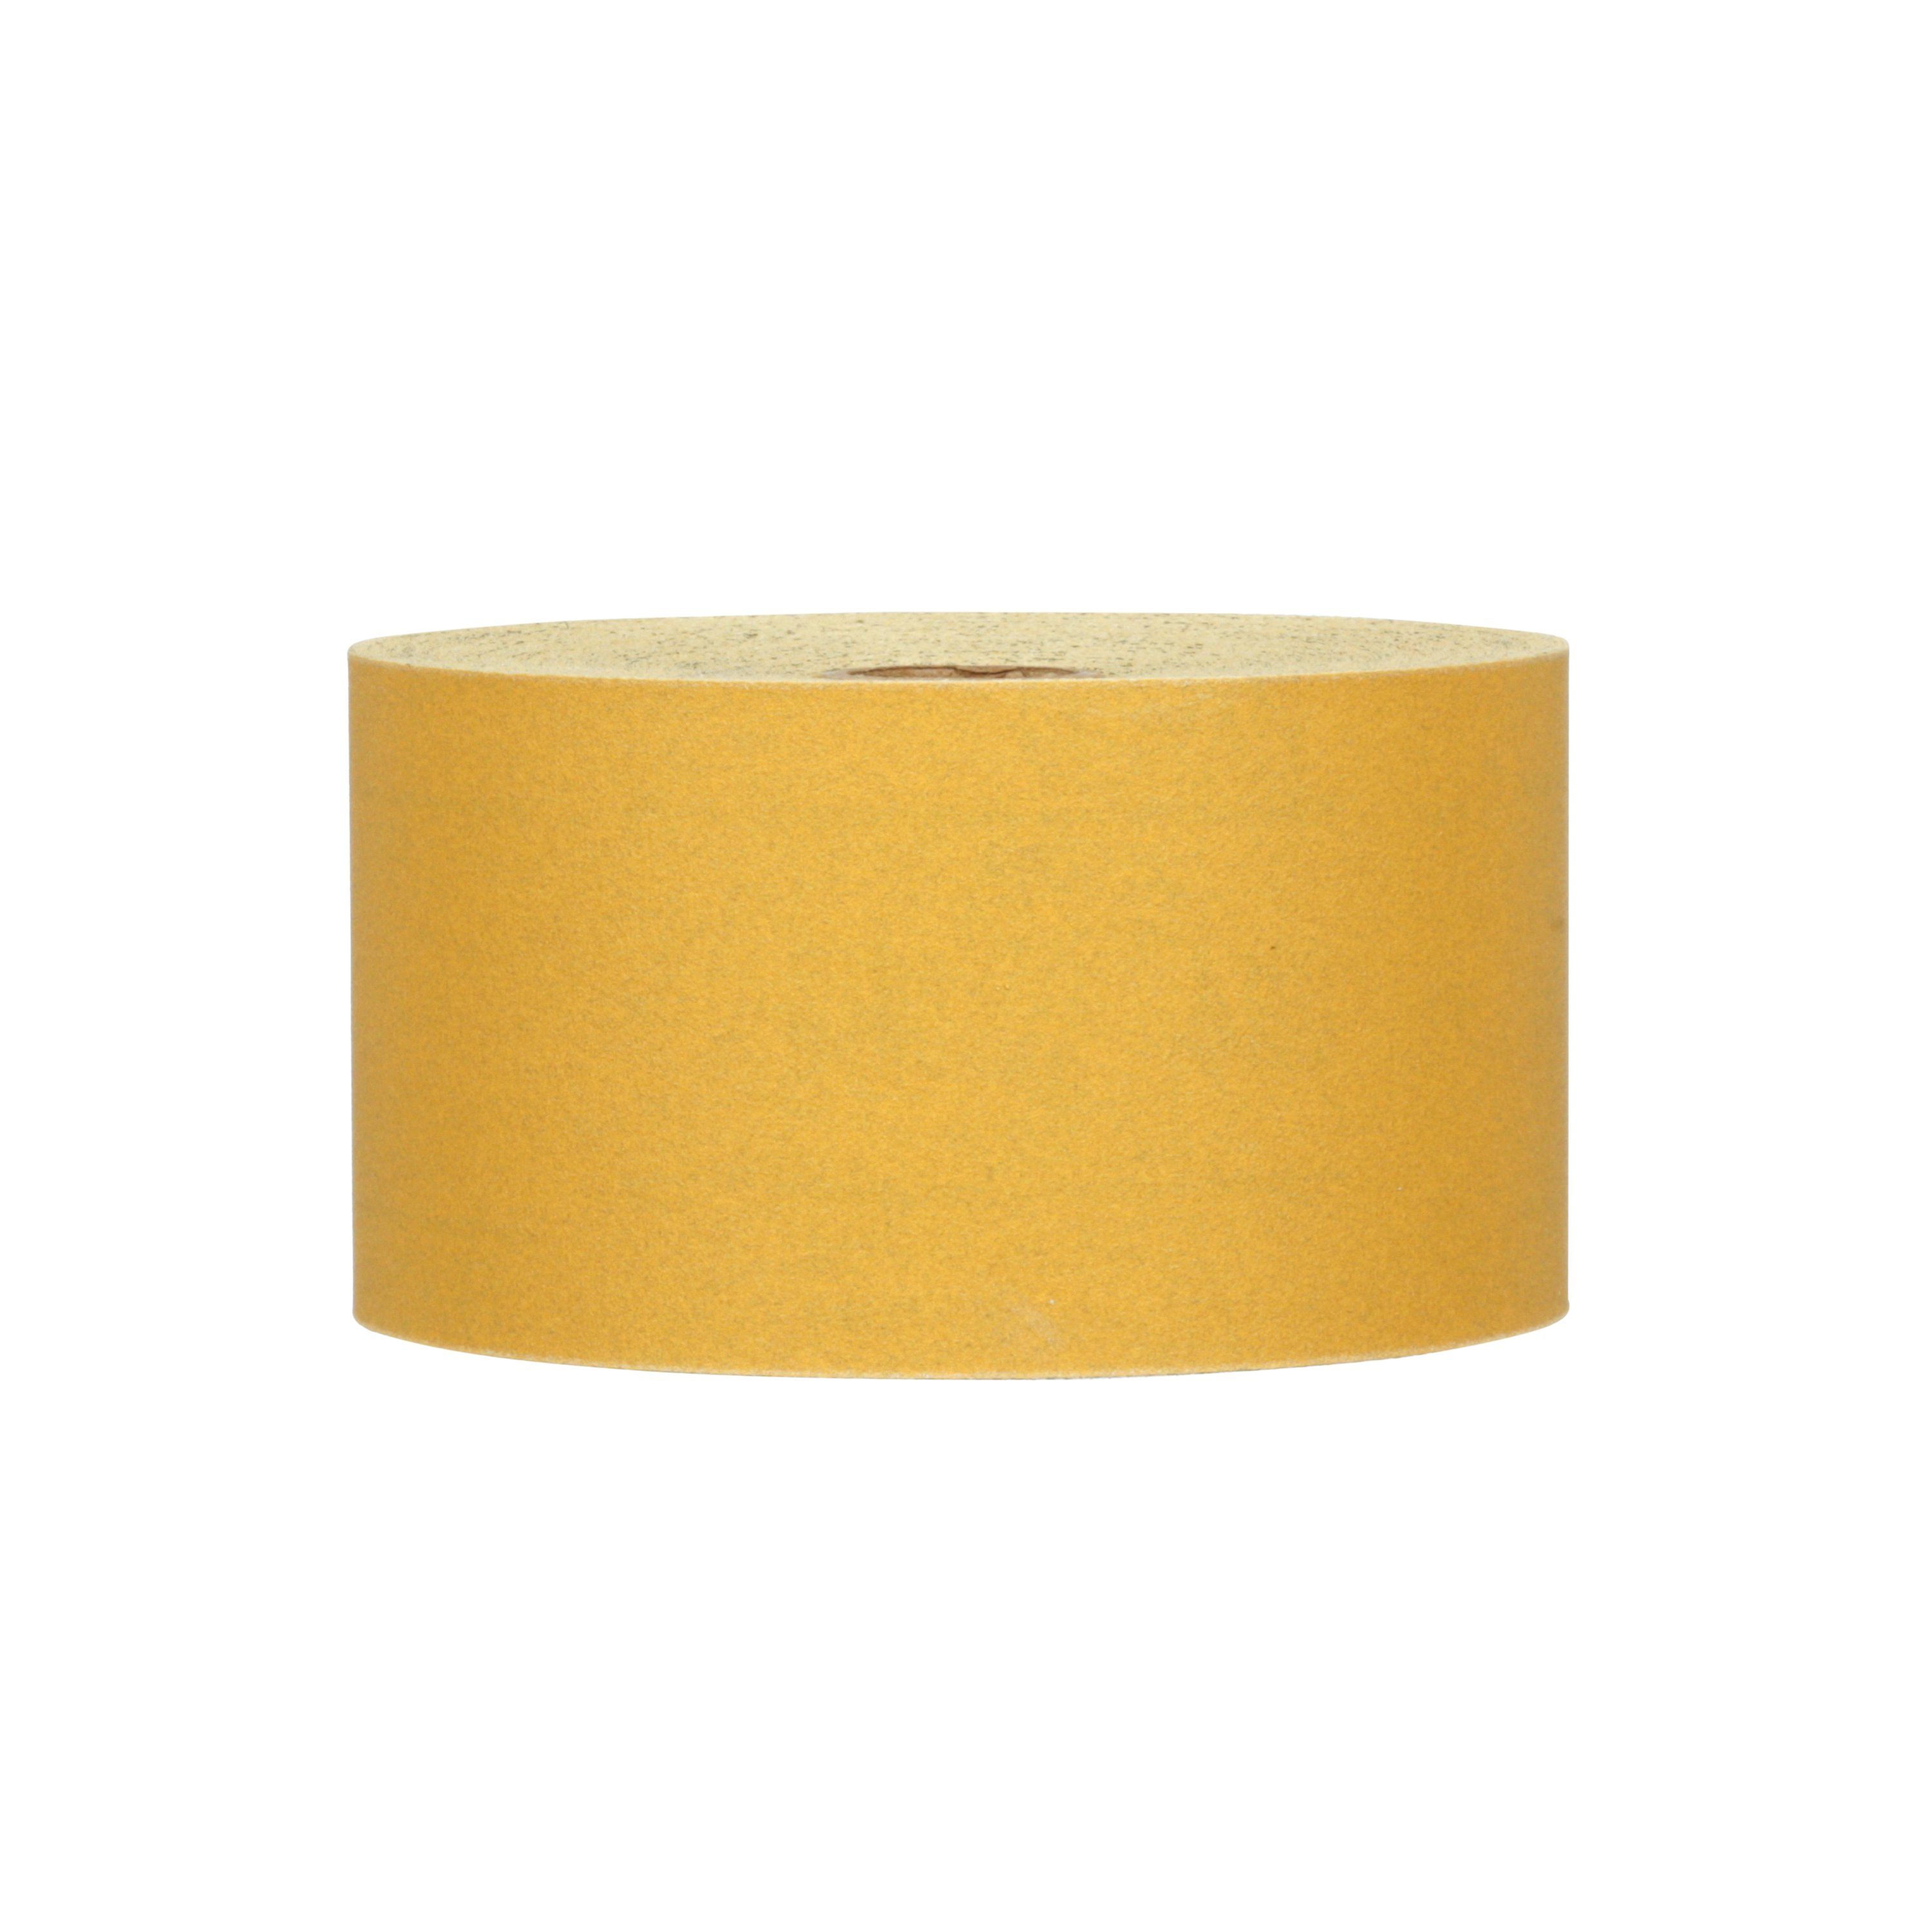 3M™ 02598 Stikit™ Gold Sheet Roll 2 3/4 in x 30 yd 2598 P100A grade